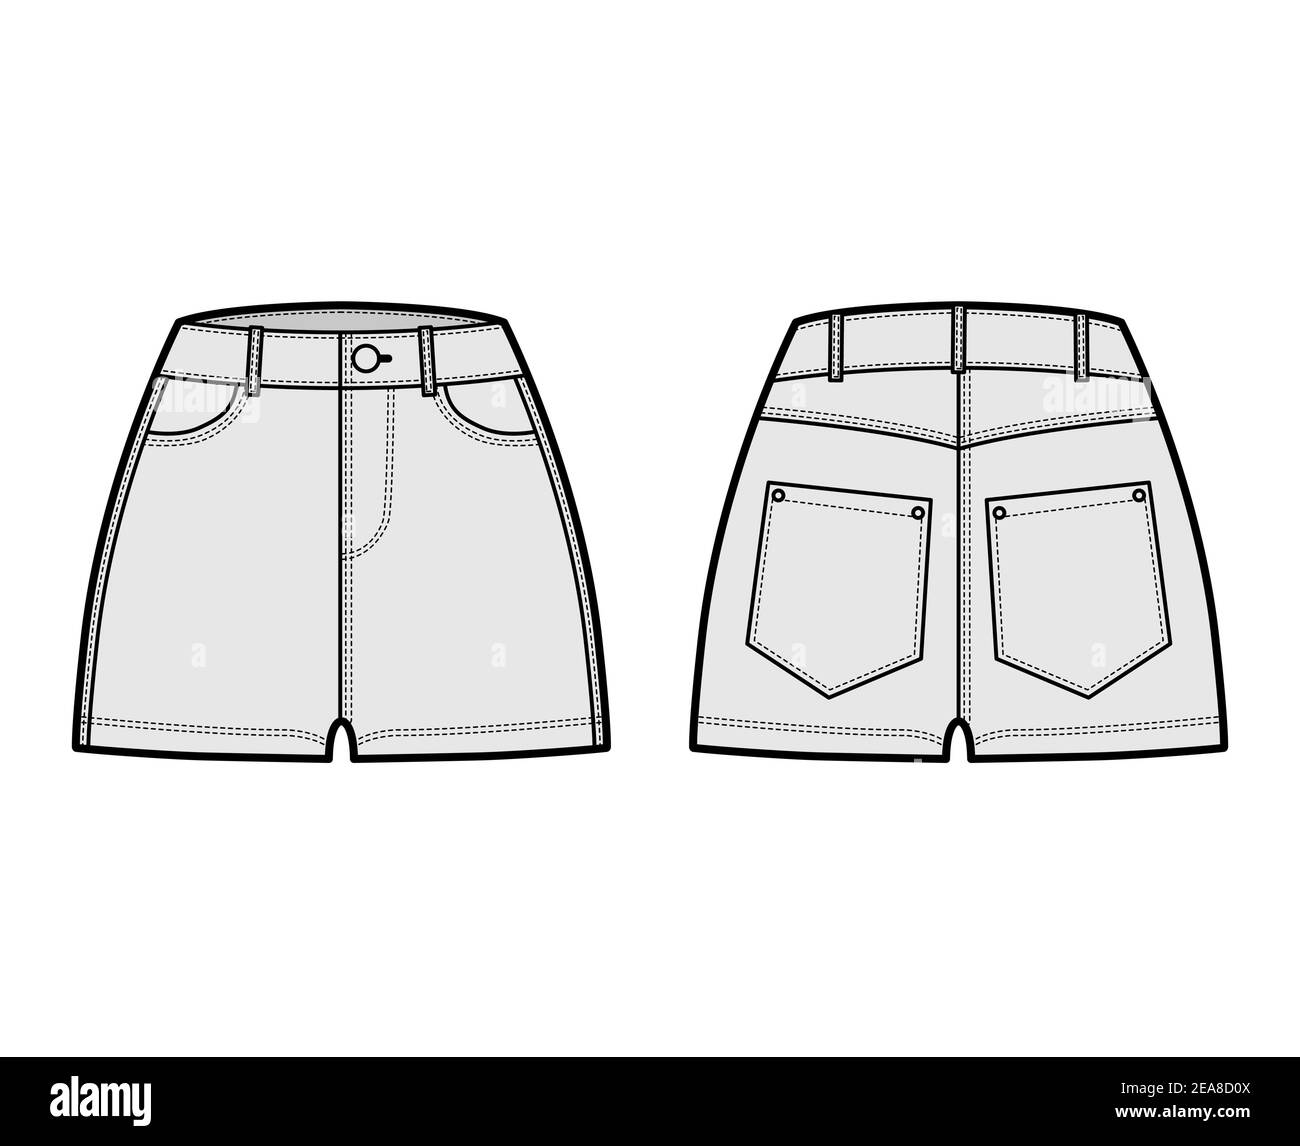 White hot pants short shorts Stock Vector Images - Alamy